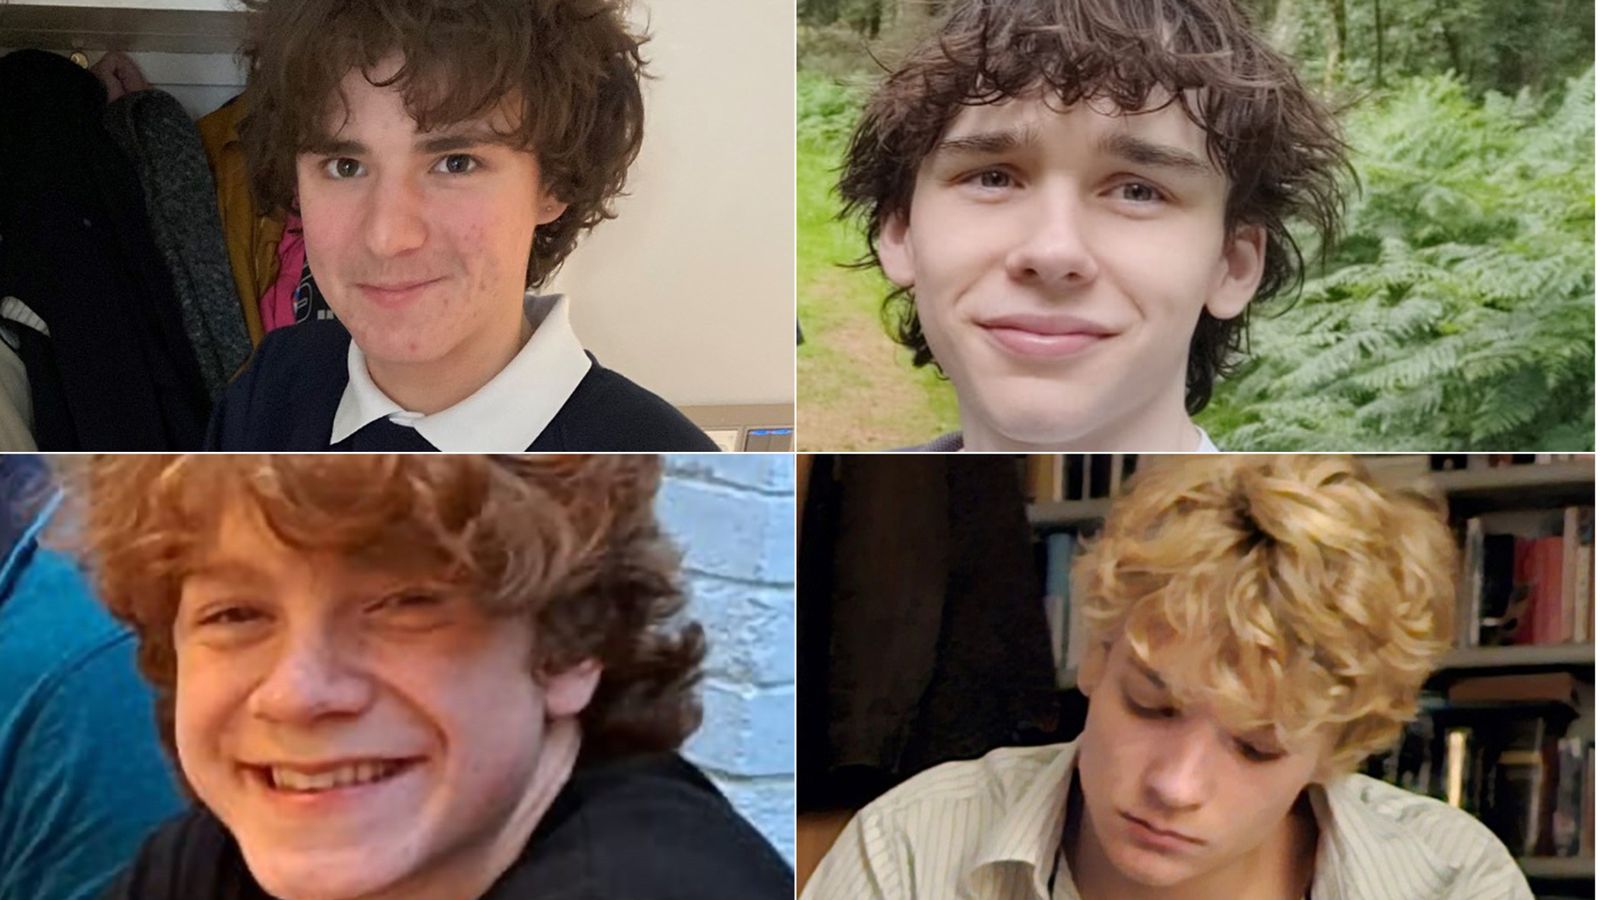 North Wales: Four teenagers killed in car crash died as a result of drowning, inquest hears